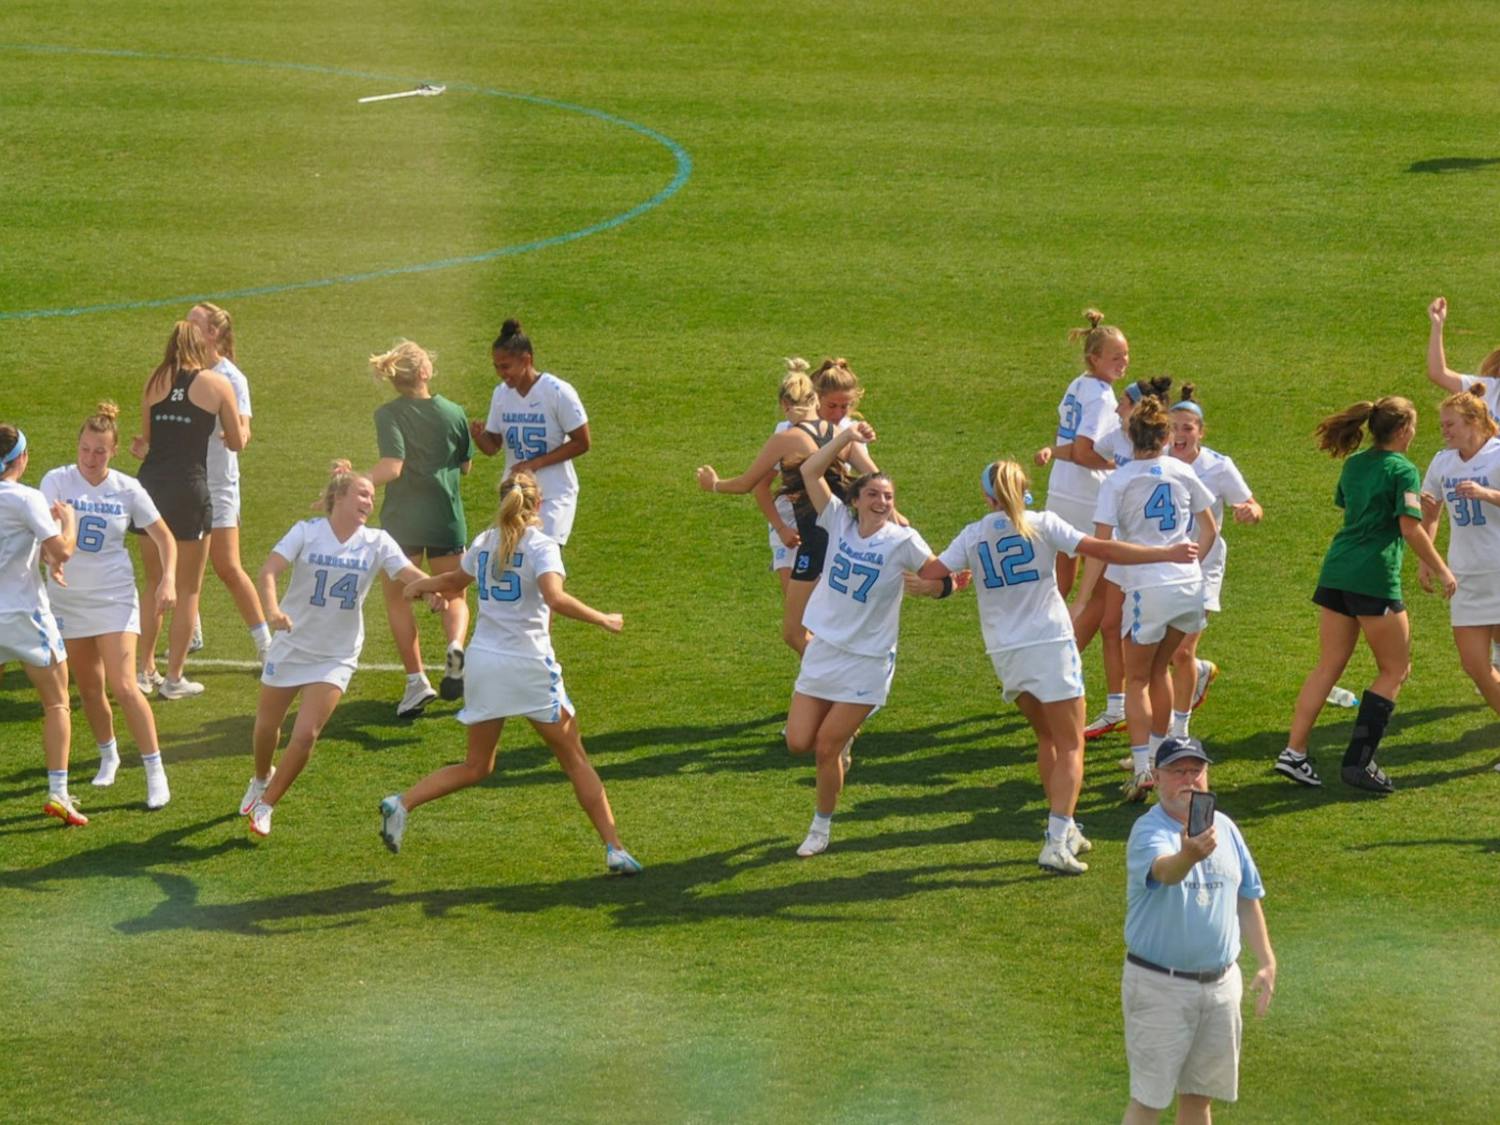 Members of the UNC women’s lacrosse team dance &nbsp;to the fight song after defeating Northwestern, 20-9, on Sunday, March 6, 2022.